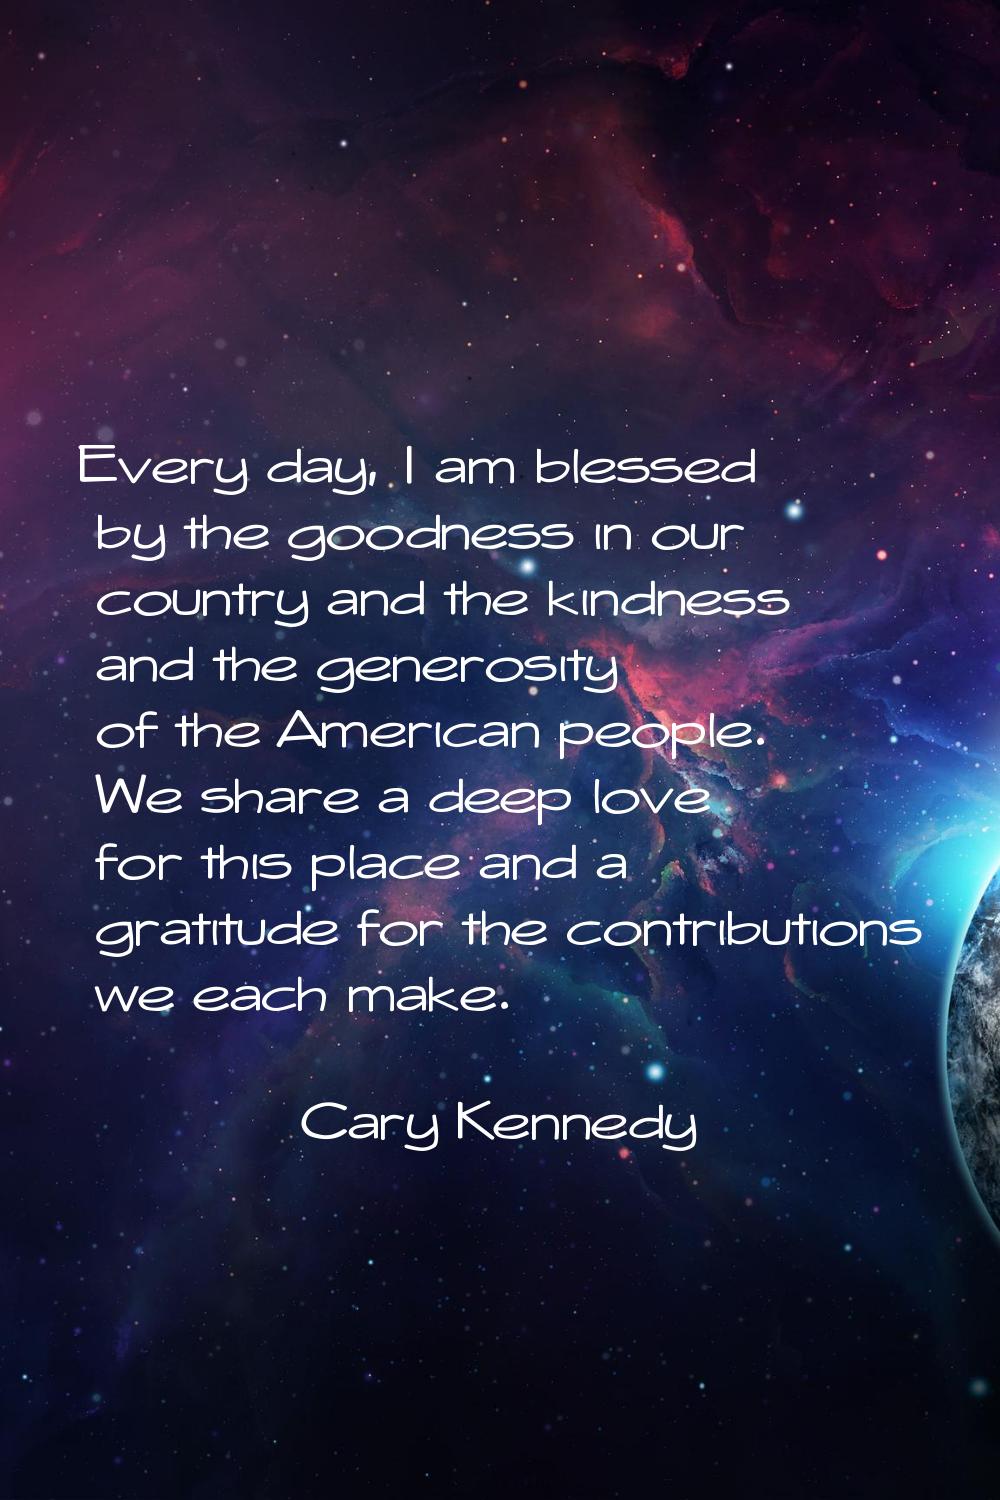 Every day, I am blessed by the goodness in our country and the kindness and the generosity of the A